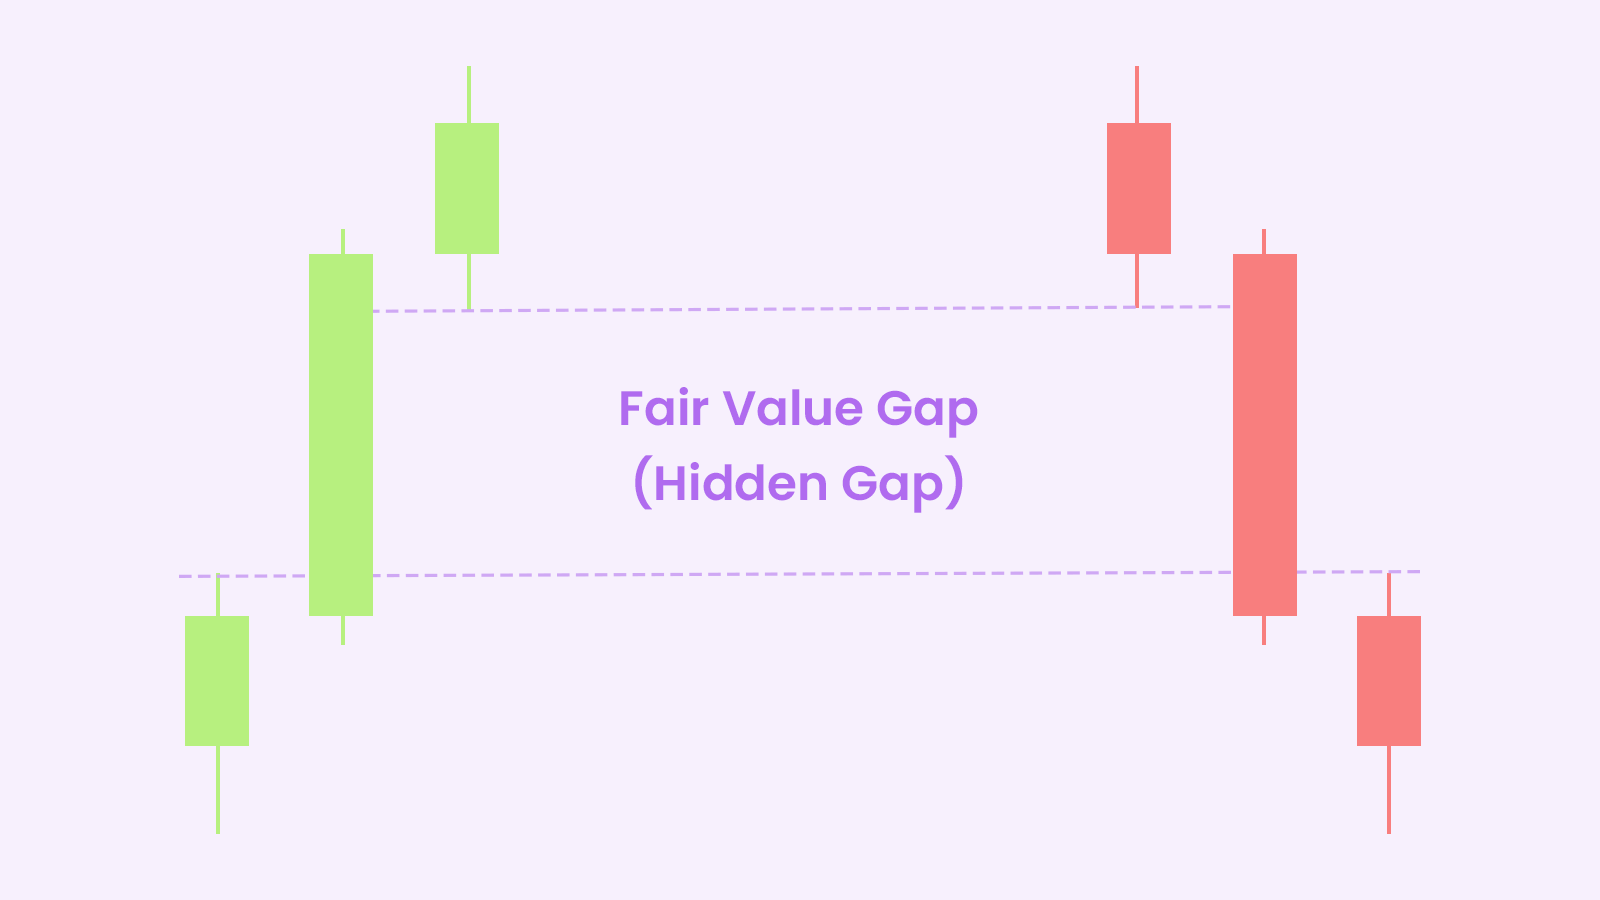 What is Fair Value Gap (FVG) Trading Strategy | GUIDE